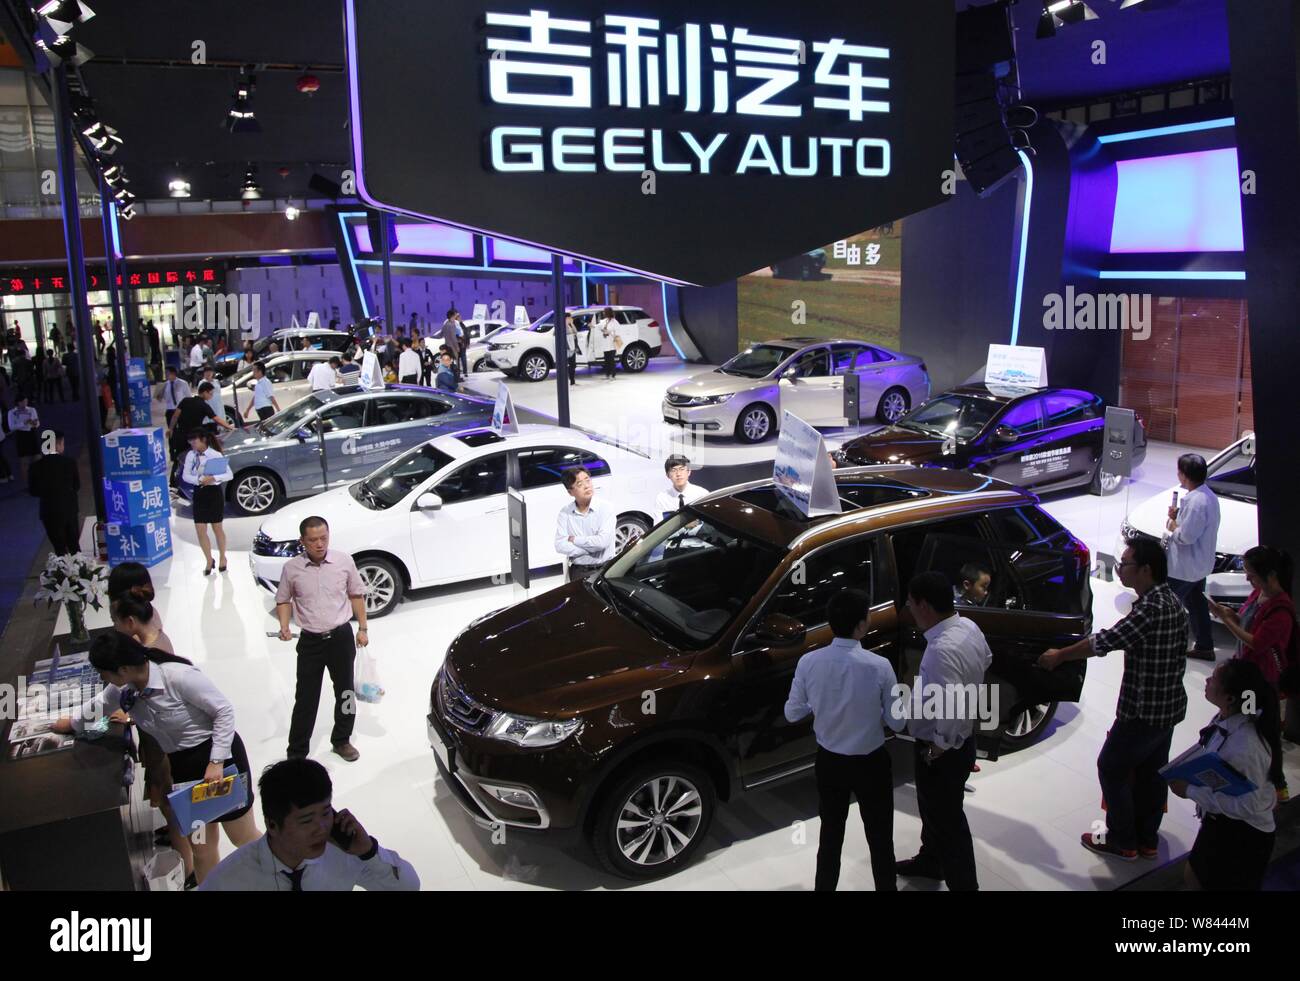 --FILE--People visit the stand of Geely during an automobile exhibition in Nanjing city, east China's Jiangsu province, 2 October 2016.   Volvo Cars a Stock Photo